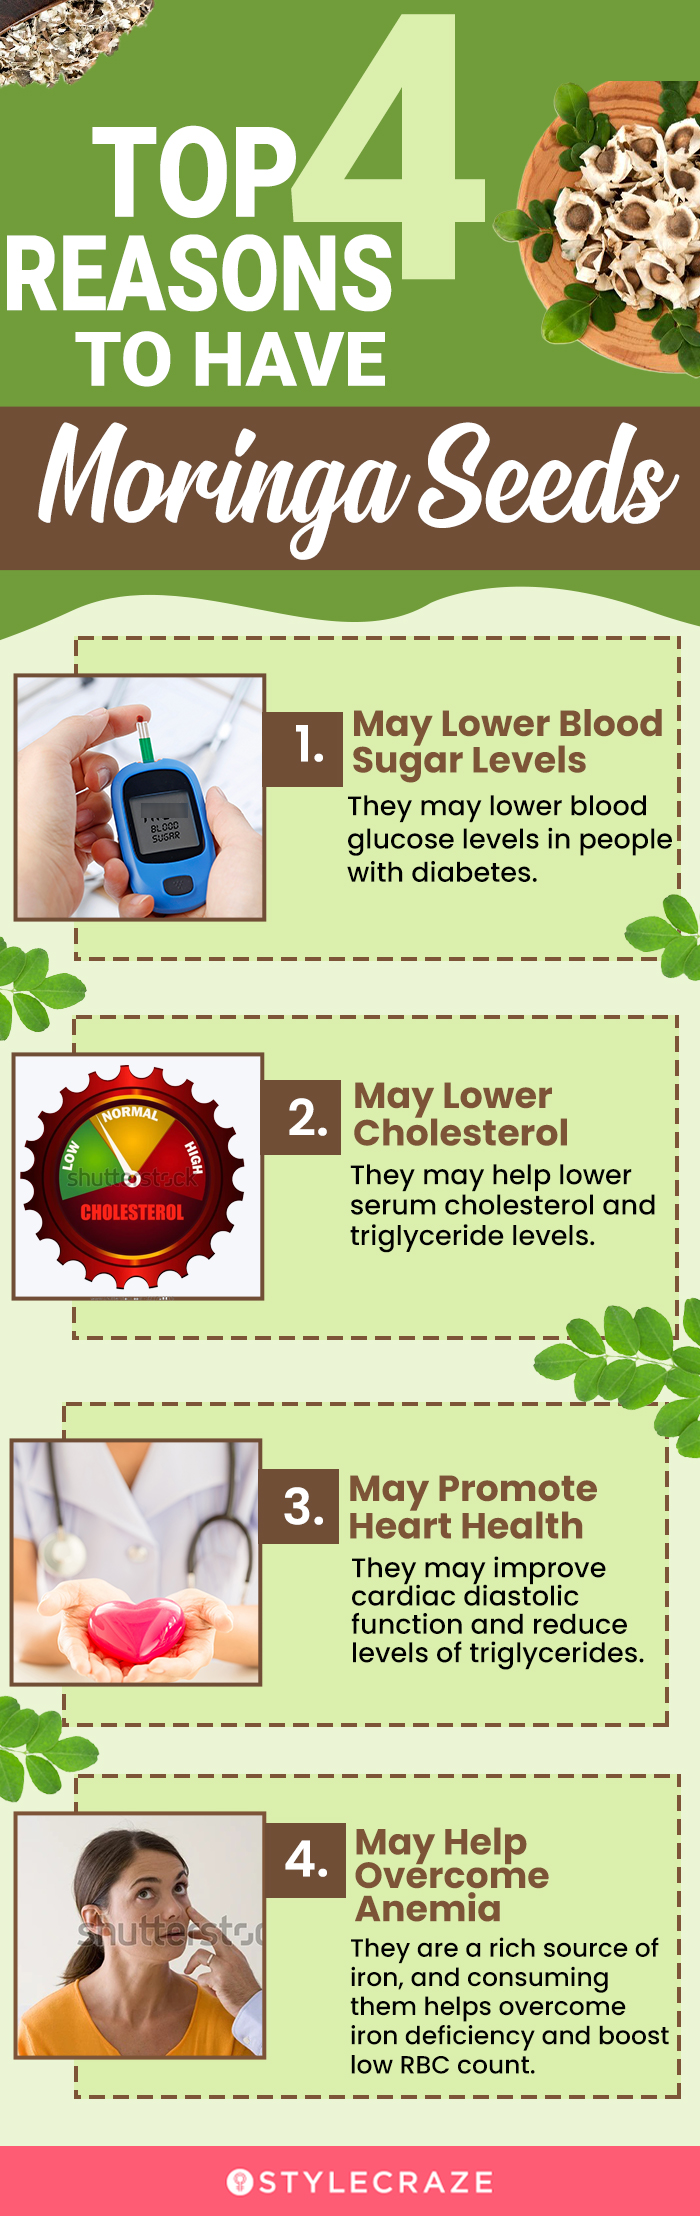 top 4 reasons to have moringa seeds (infographic)